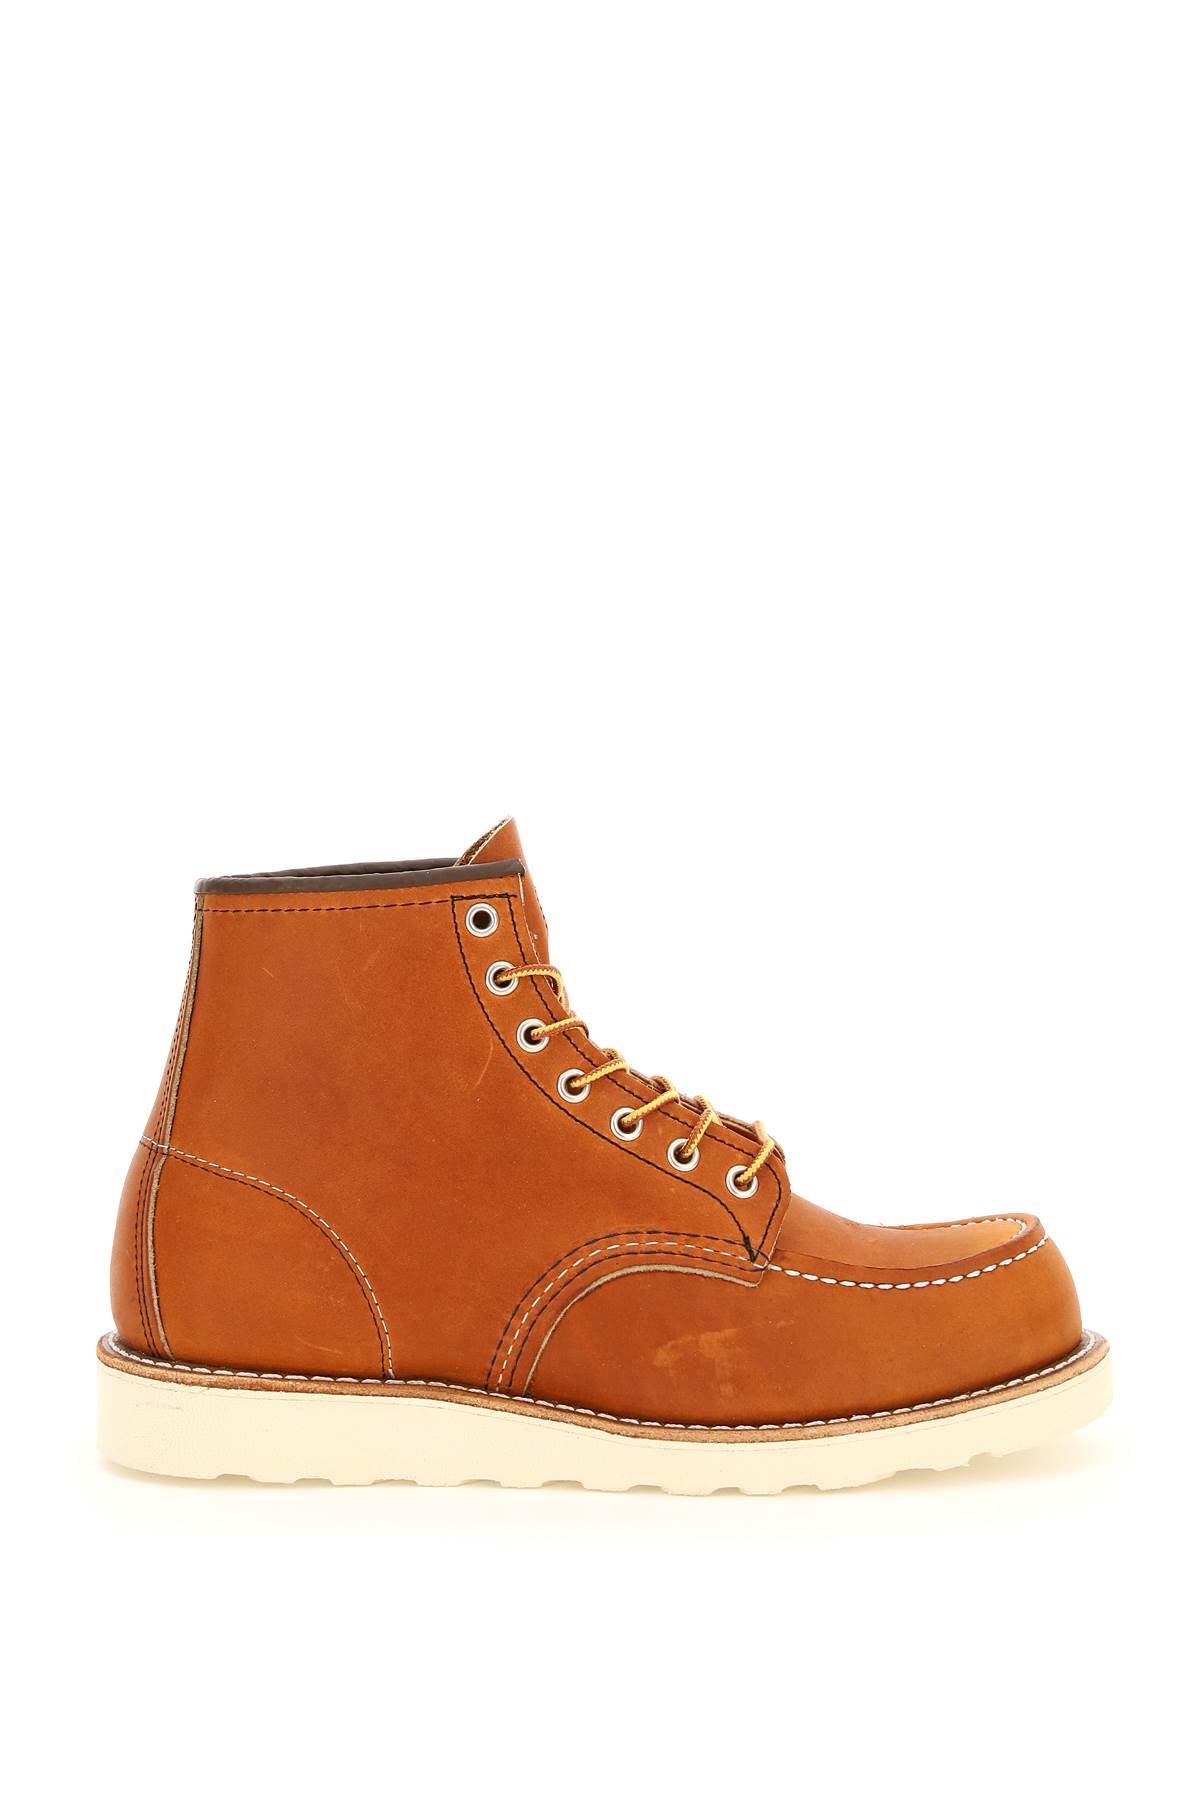 Red wing shoes classic moc ankle boots-0